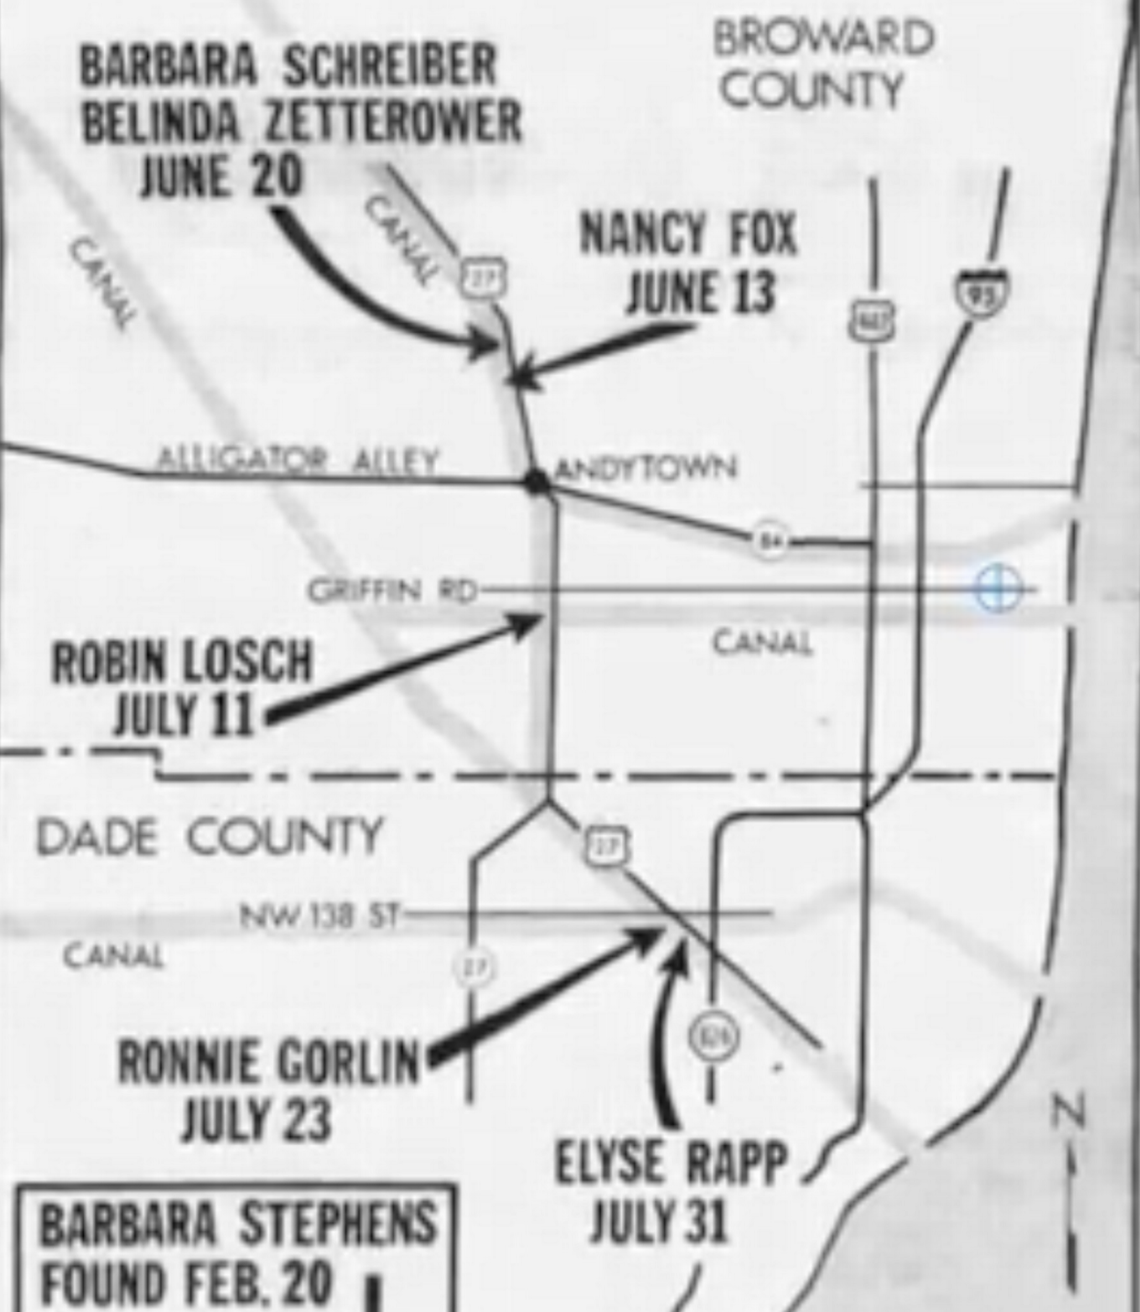 Detective Gianino said they are also looking at any possible connection between Keebler and the unsolved killings of several other women in the Broward and Miami-Dade area, from 1975 to 1976, known as the Flat Tire murders.